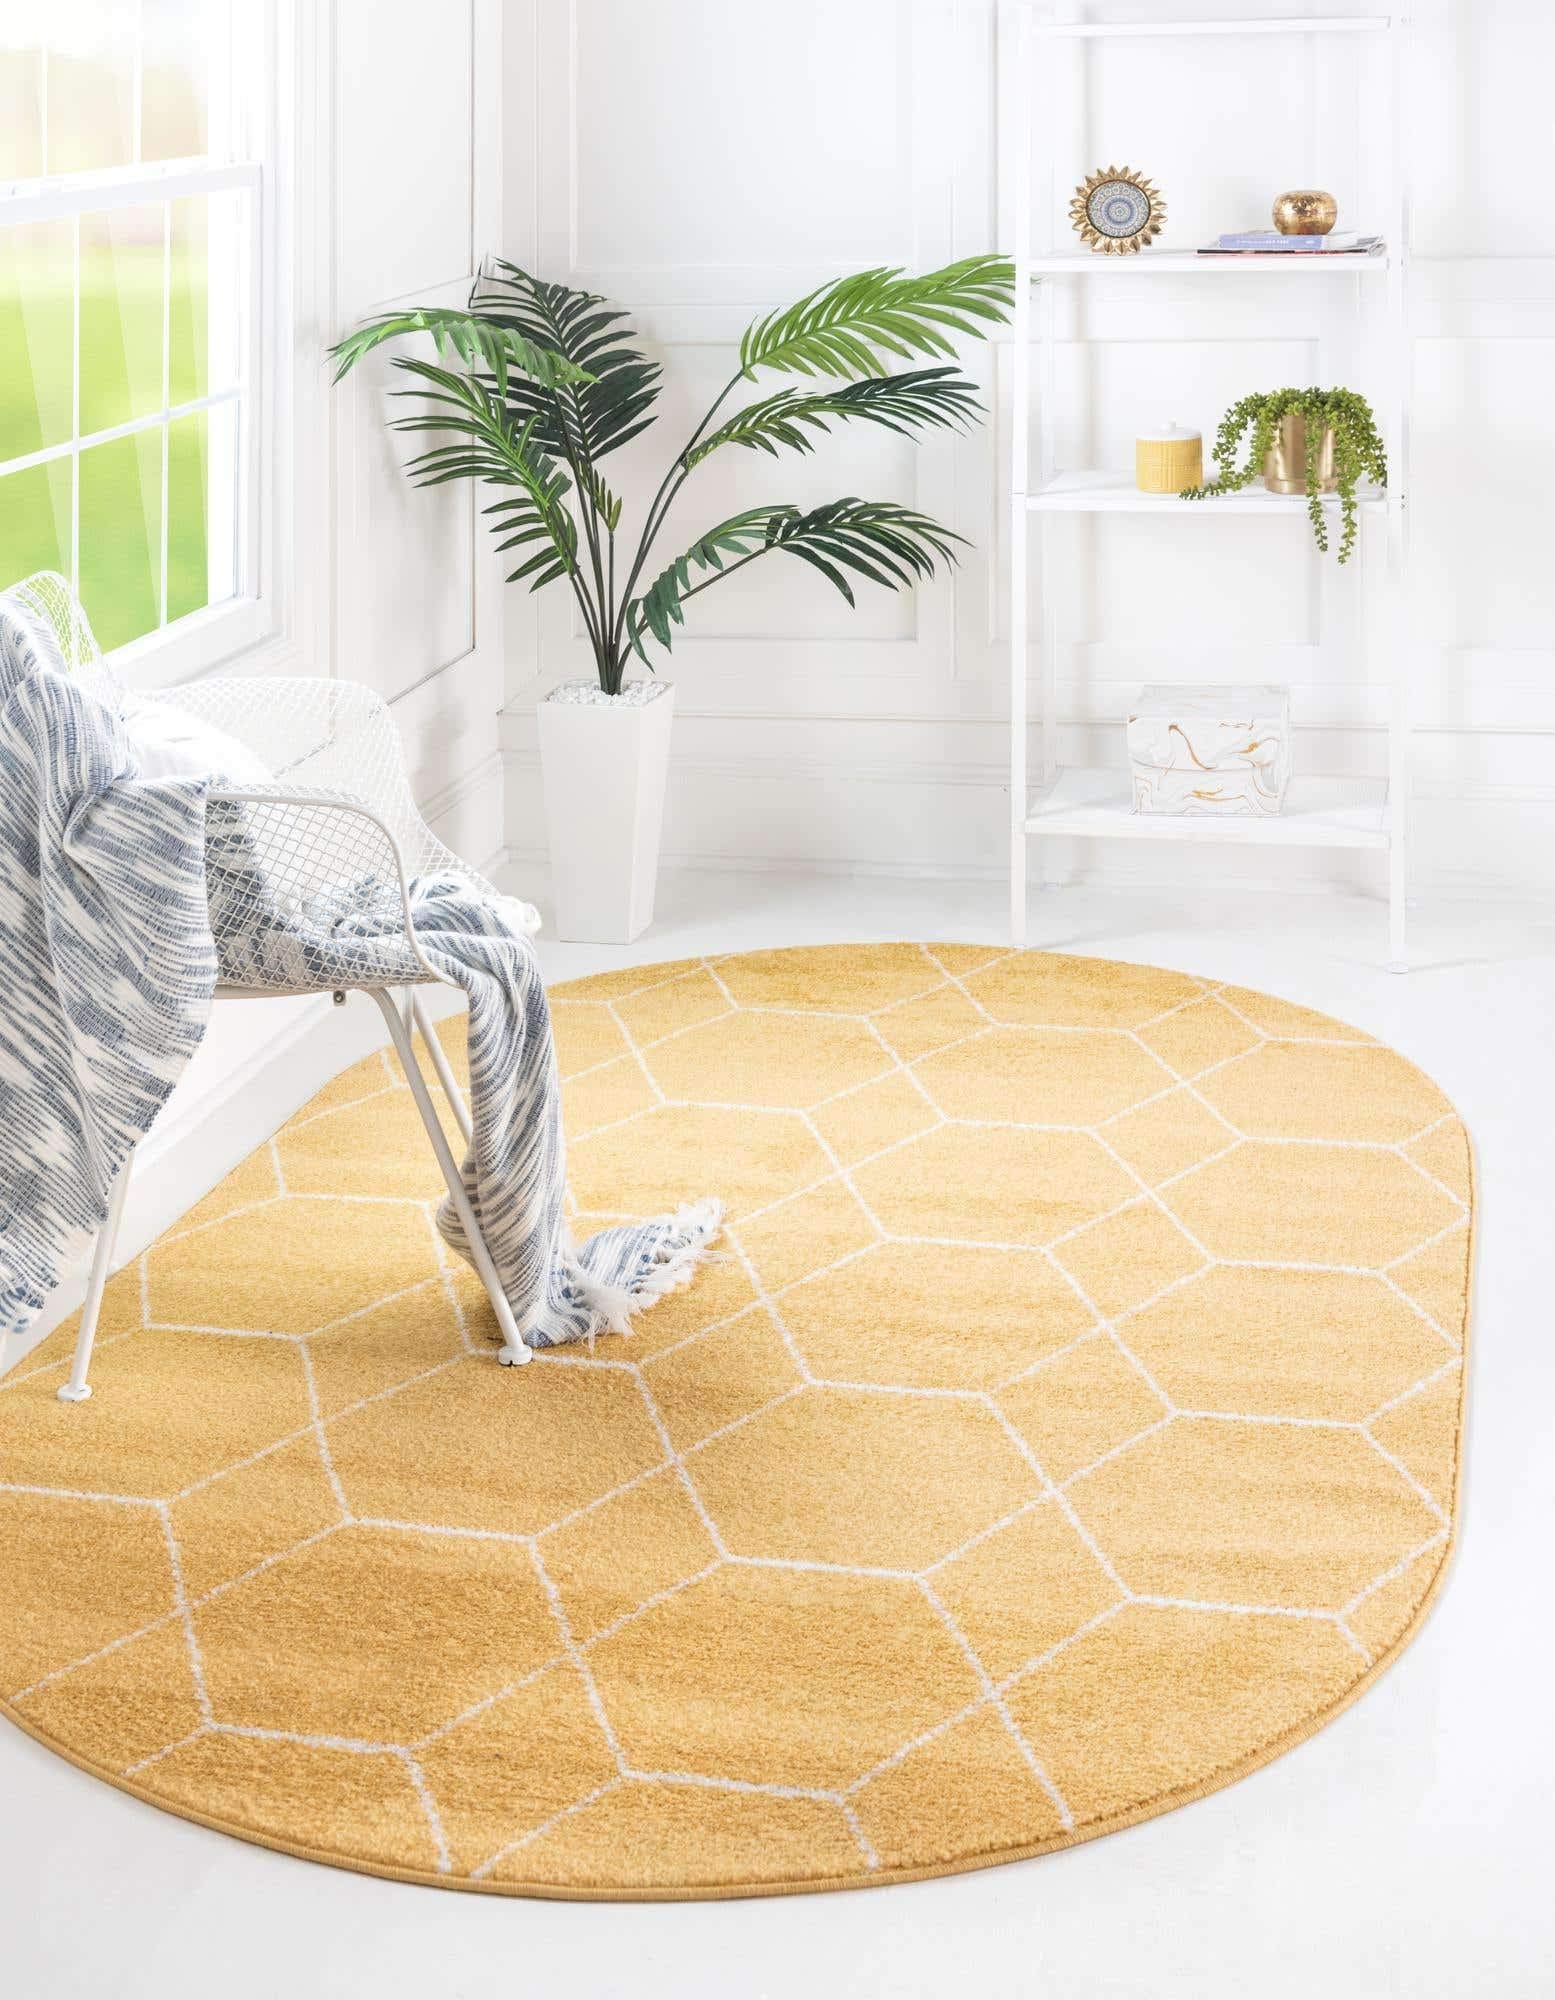 Unique Loom Trellis Frieze Collection Area Rug - Geometric (5' x 8' Oval, Yellow/ Ivory)